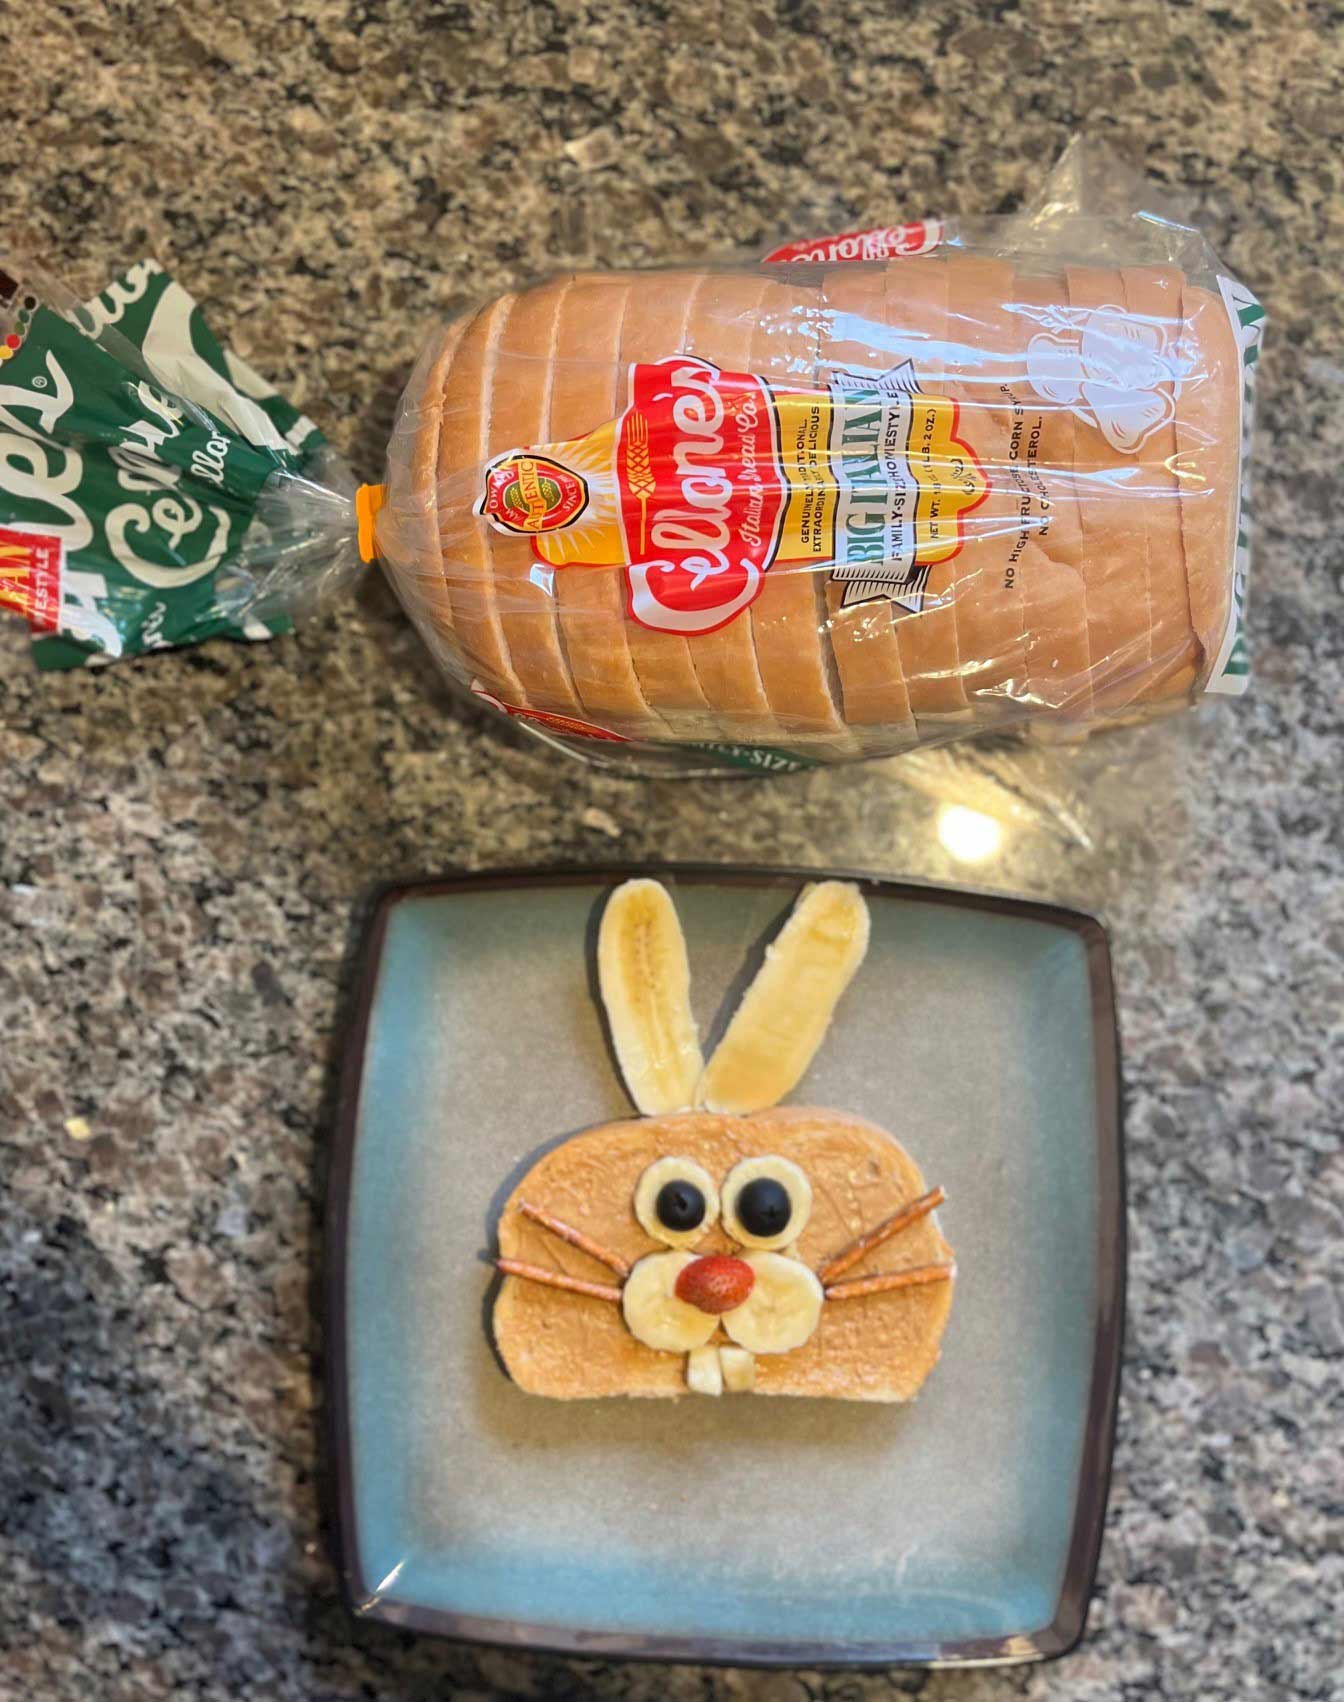 Bread made to look like a rabbit